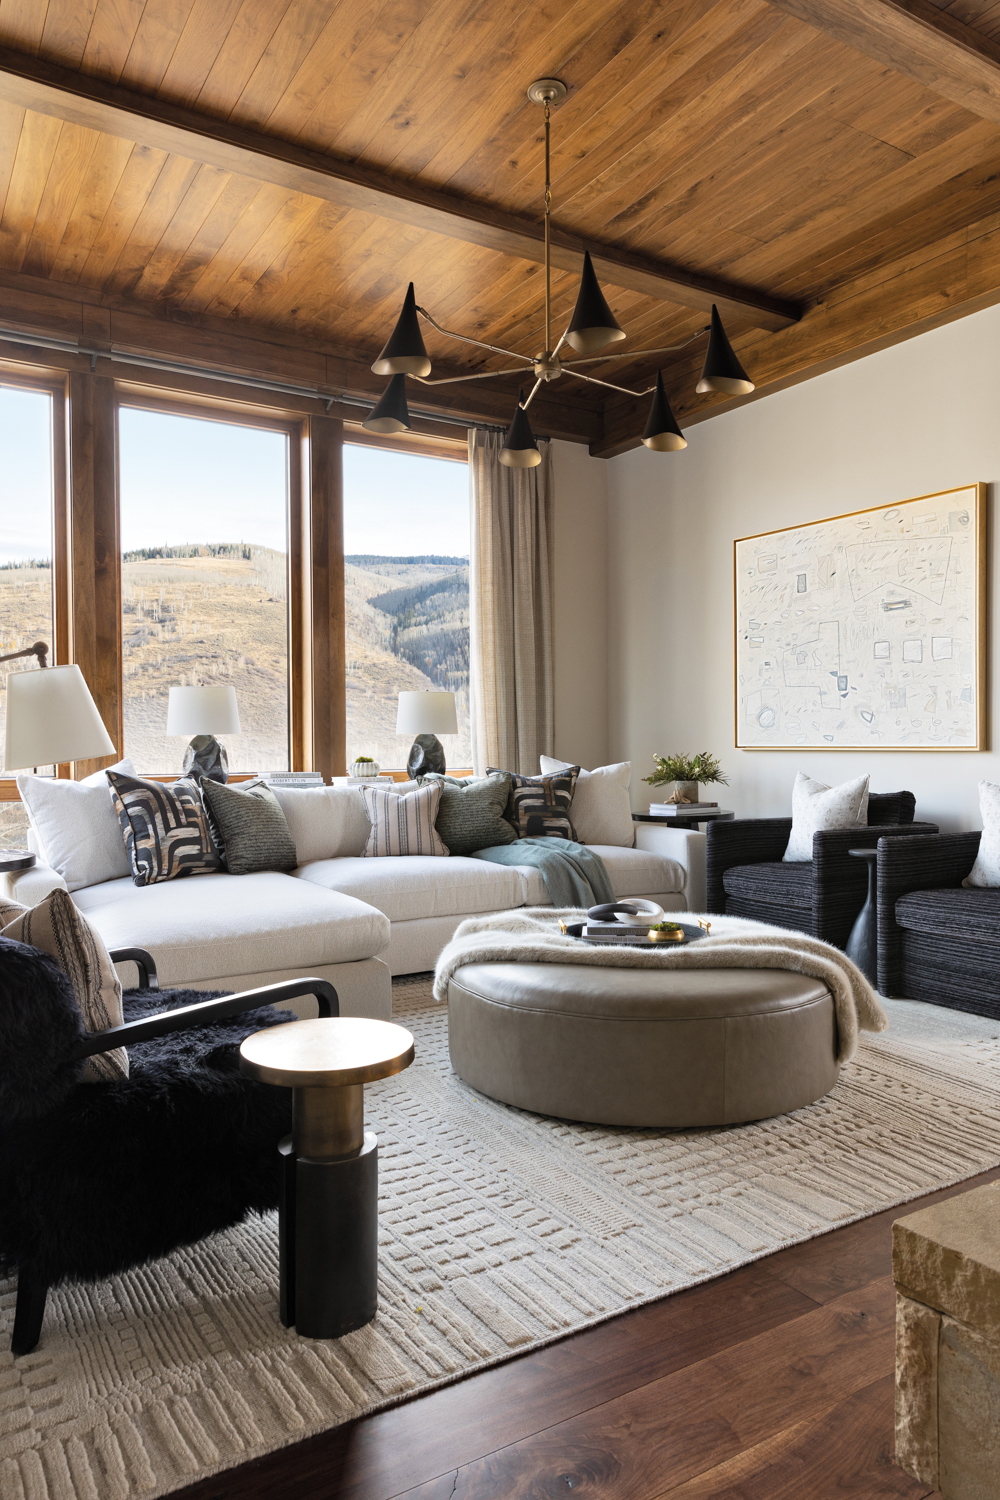 Lounge room with white sectional, round leather ottoman, white rug and mountain views